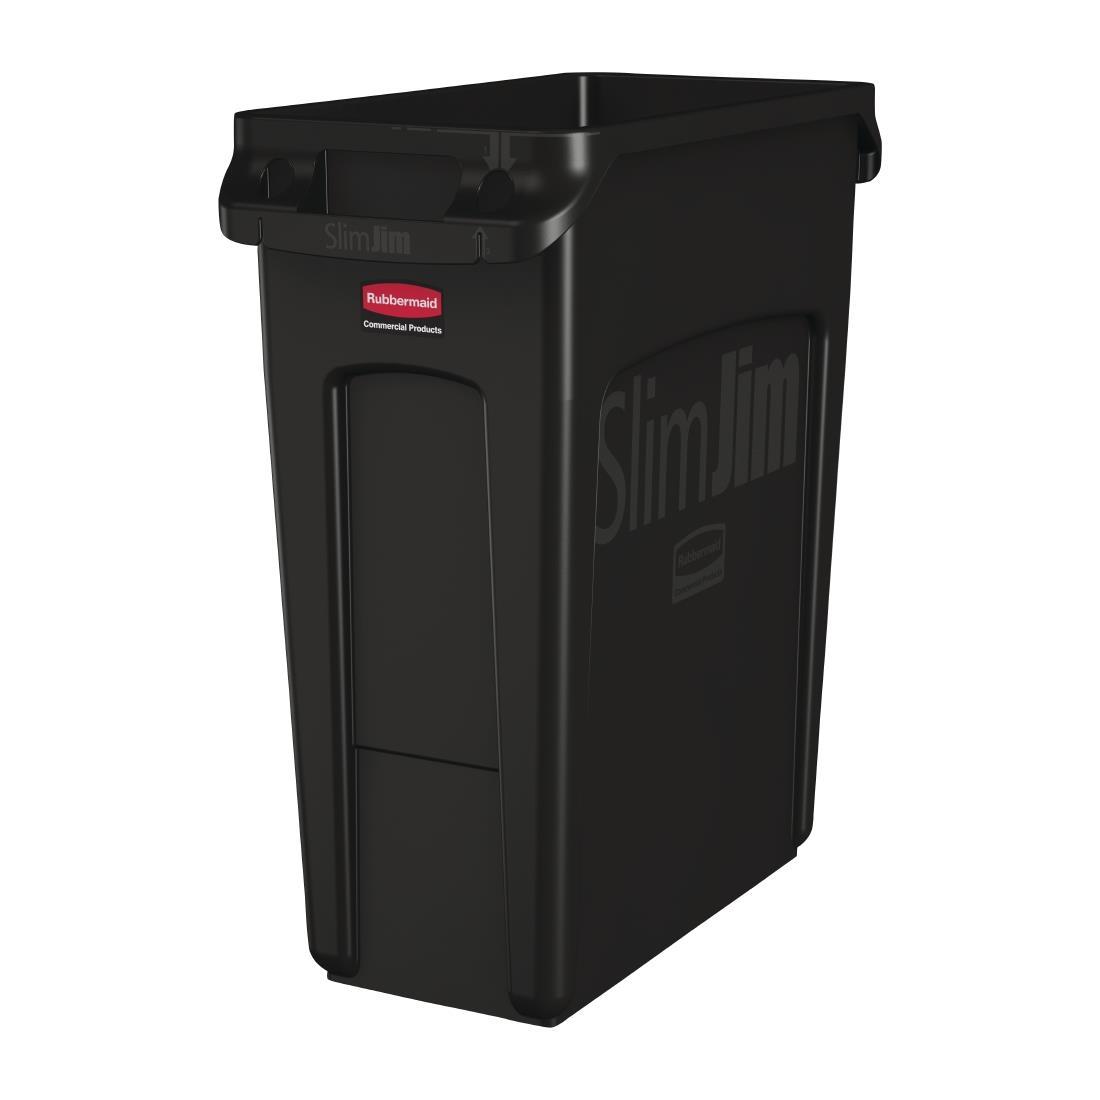 Rubbermaid Slim Jim Container With Venting Channels Black 60Ltr - CP652  - 1